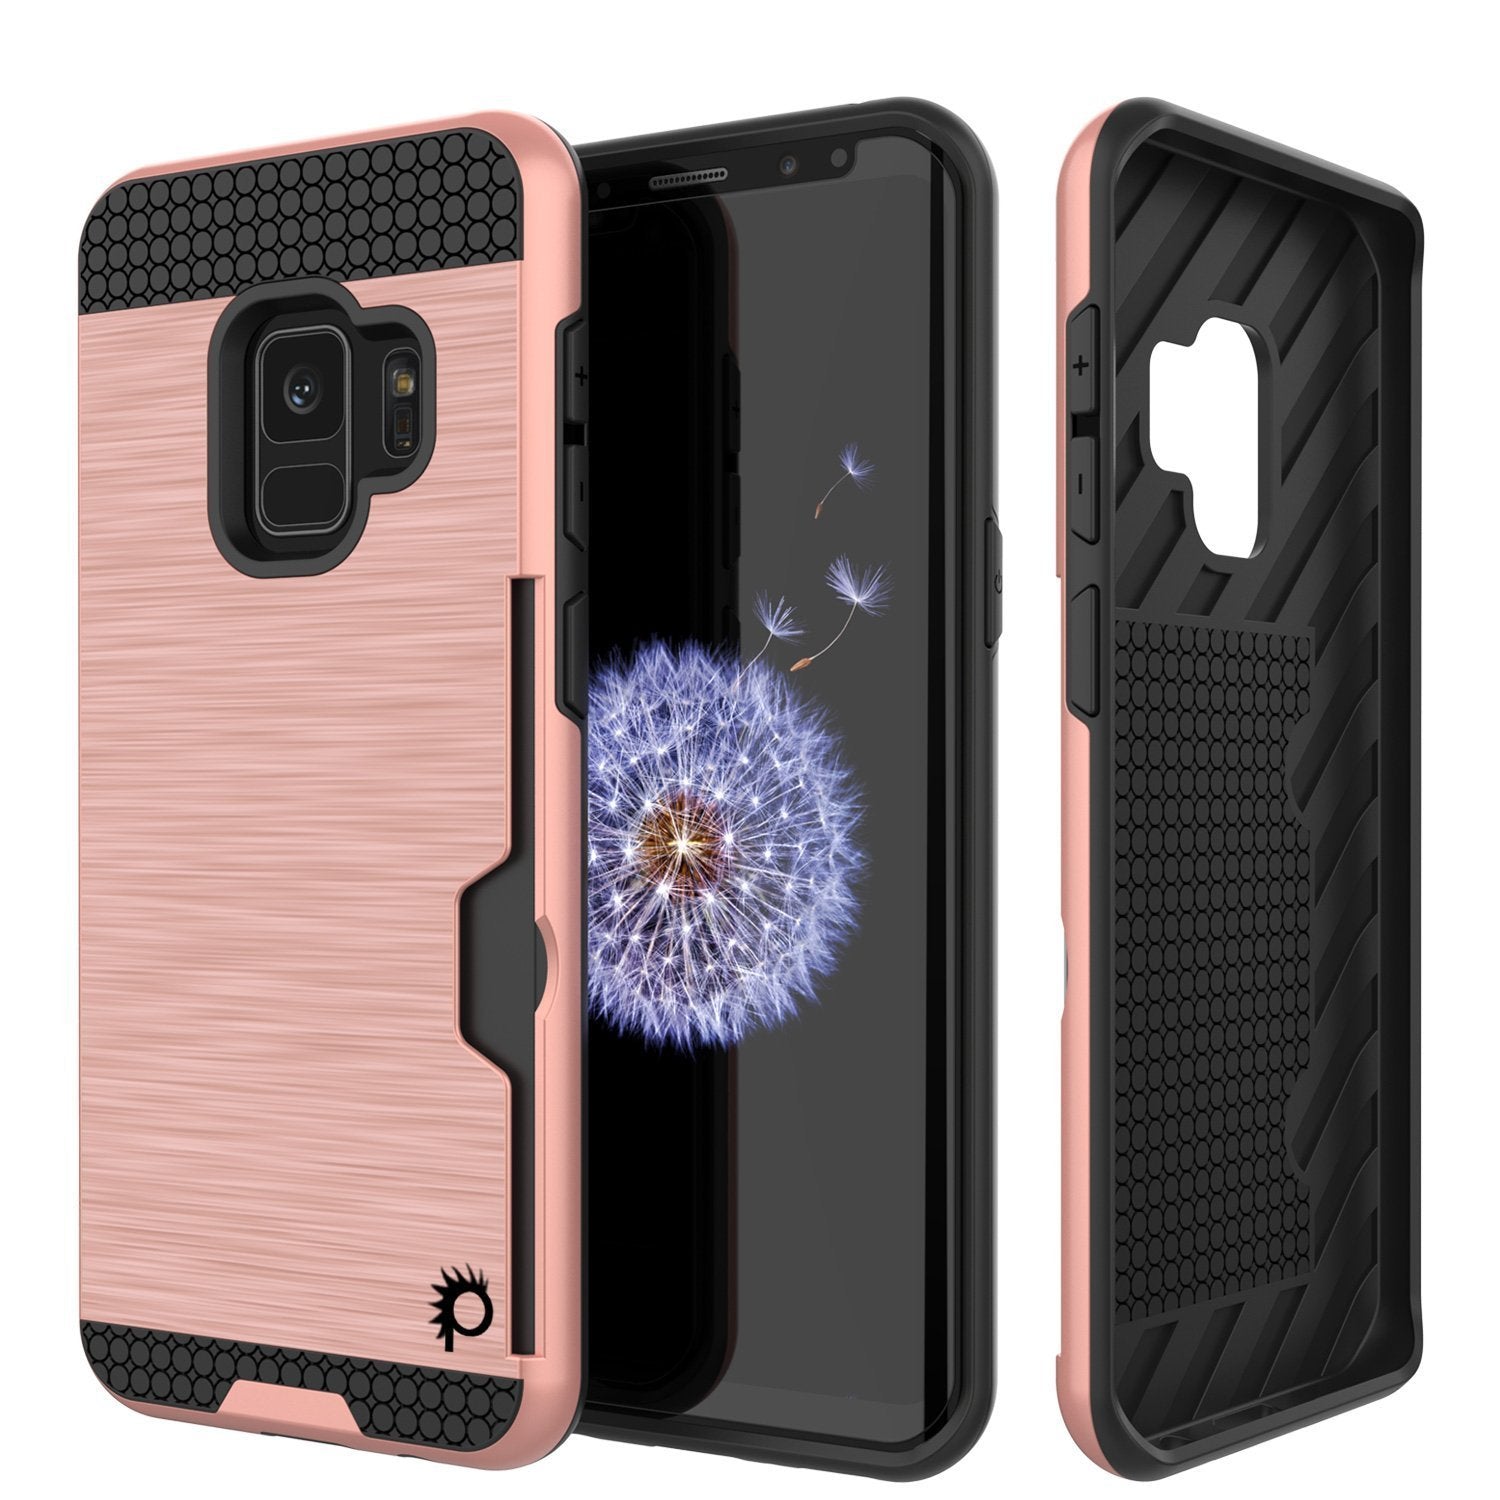 Galaxy S9 Case, PUNKcase [SLOT Series] [Slim Fit] Dual-Layer Armor Cover w/Integrated Anti-Shock System, Credit Card Slot [Rose Gold]